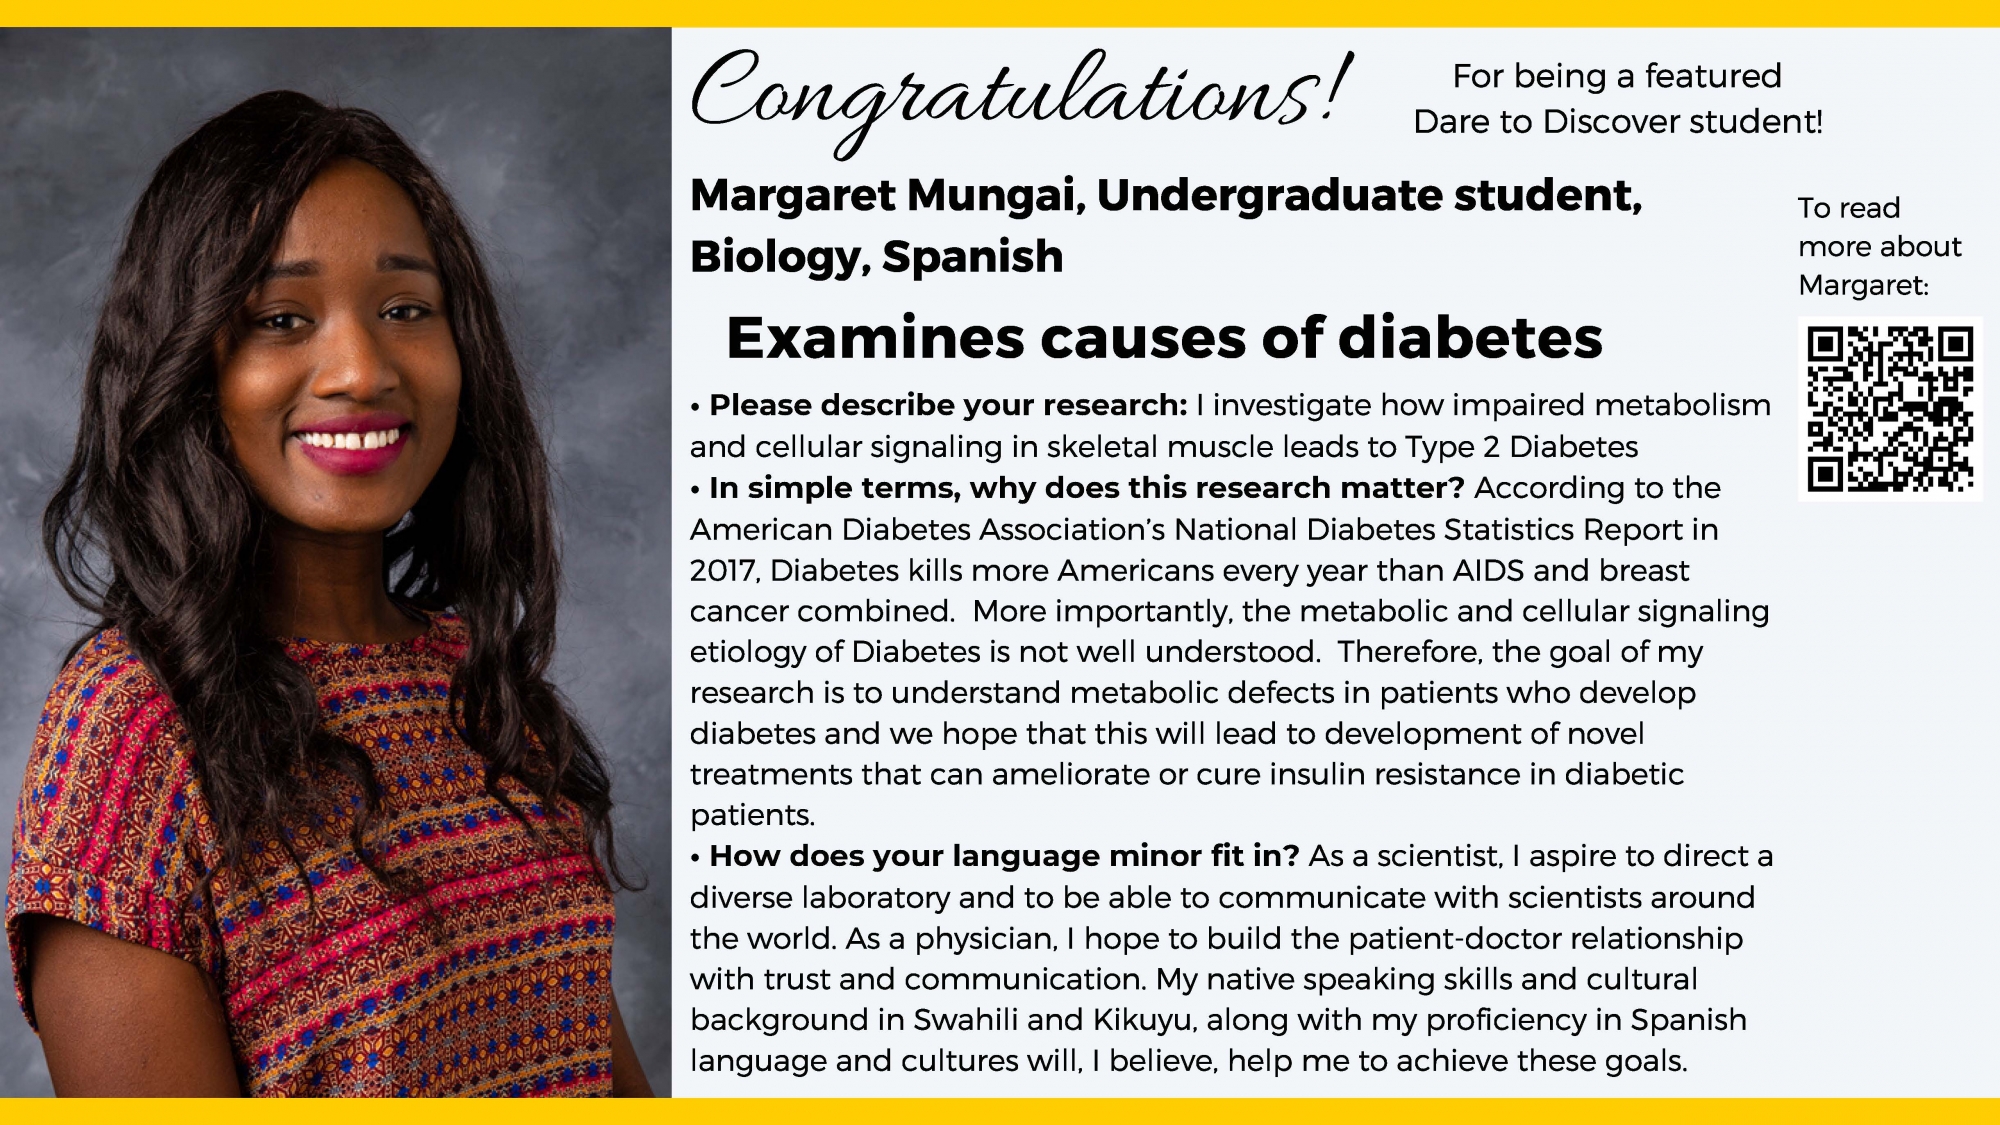 Congratulations Margaret Mungai for being a Dare to Discover student! She'd un undergraduate student studying Biology and spanish and researchers to examine the cause of diabetes